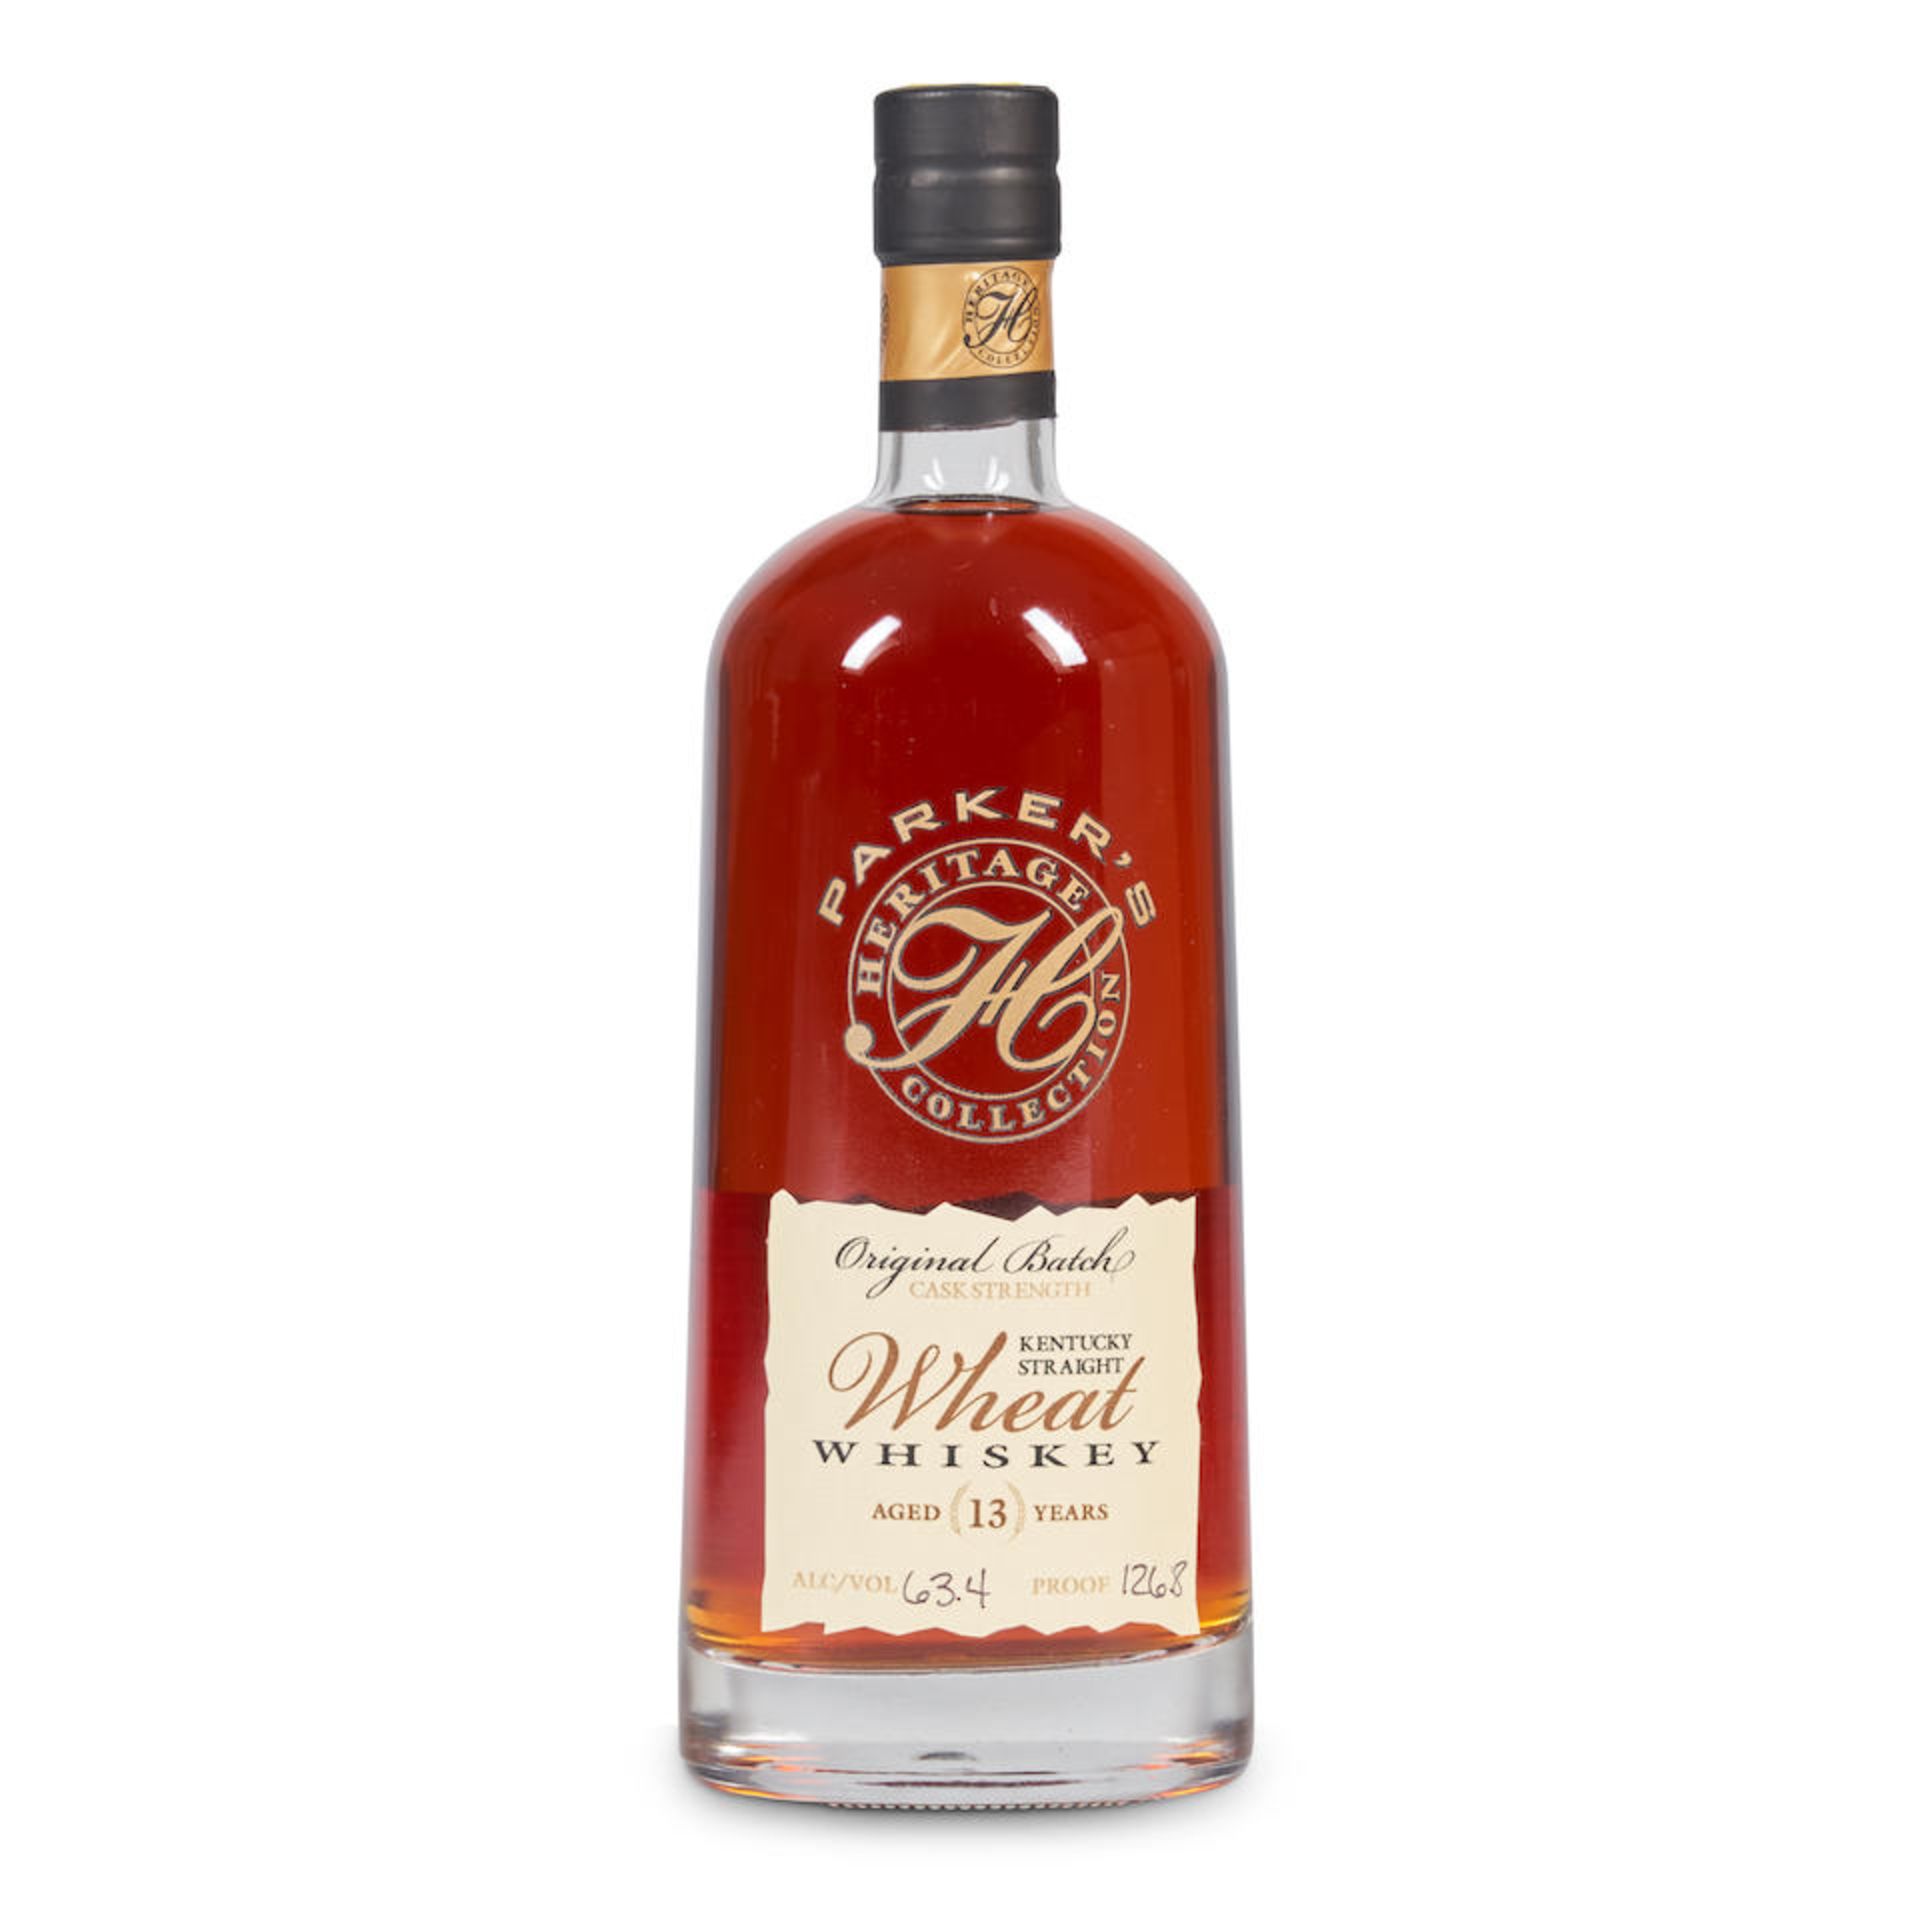 Parker's Heritage 13 Years Old Wheat Whiskey (1 750ml bottle)